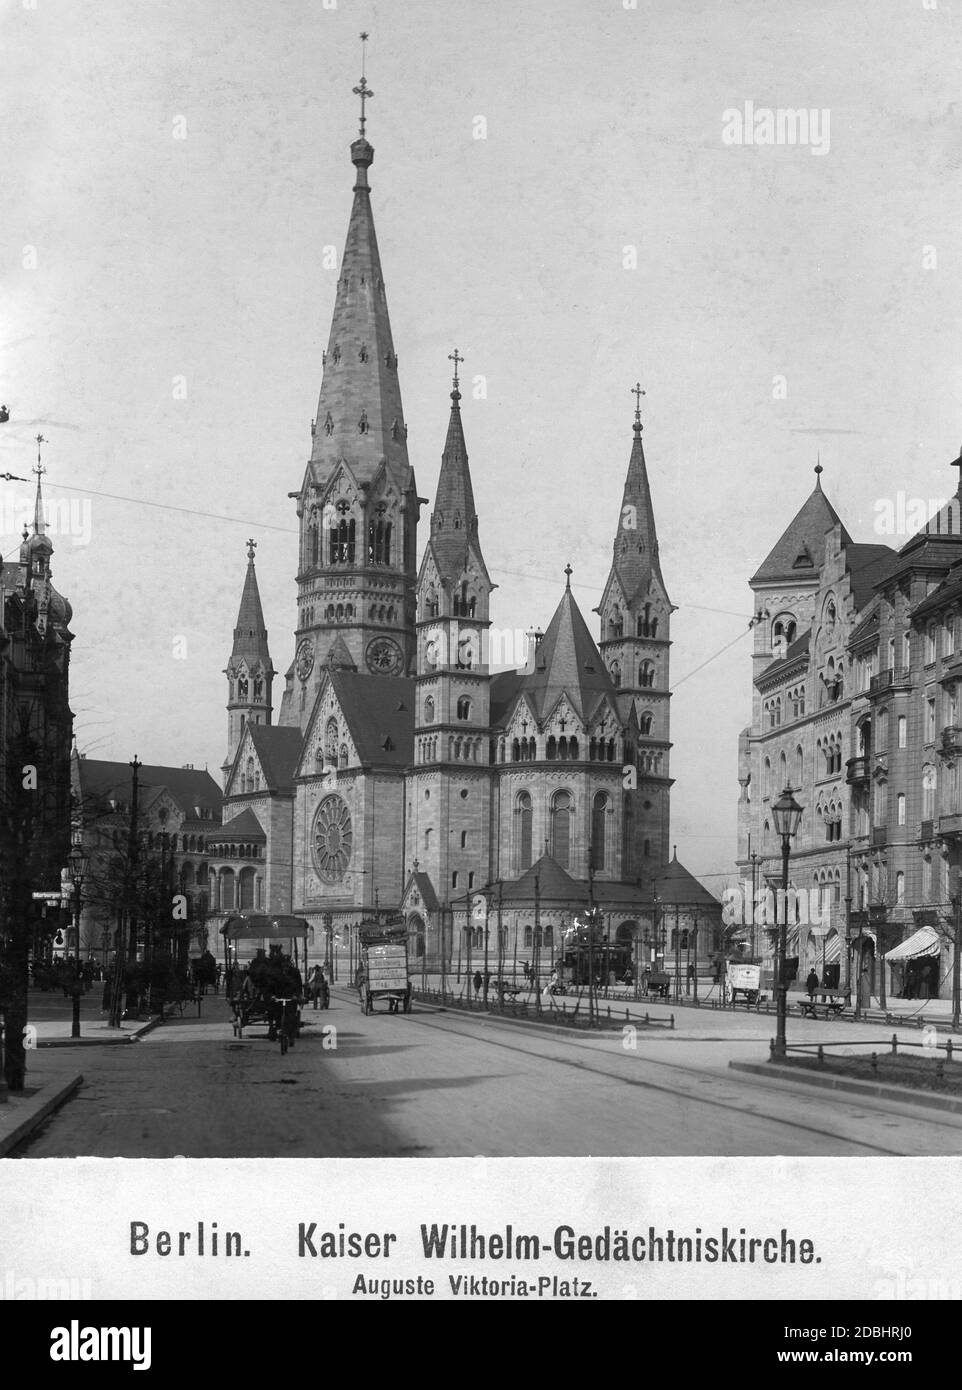 The photo shows the Kaiser Wilhelm Memorial Church on Auguste-Viktoria-Platz (today: Breitscheidplatz) in Berlin-Charlottenburg. In front of it is the Tauentzienstrasse, on which carts are driving. On the right is the Zweites Romanisches Haus. Undated photo, probably taken in the 1900s. Stock Photo